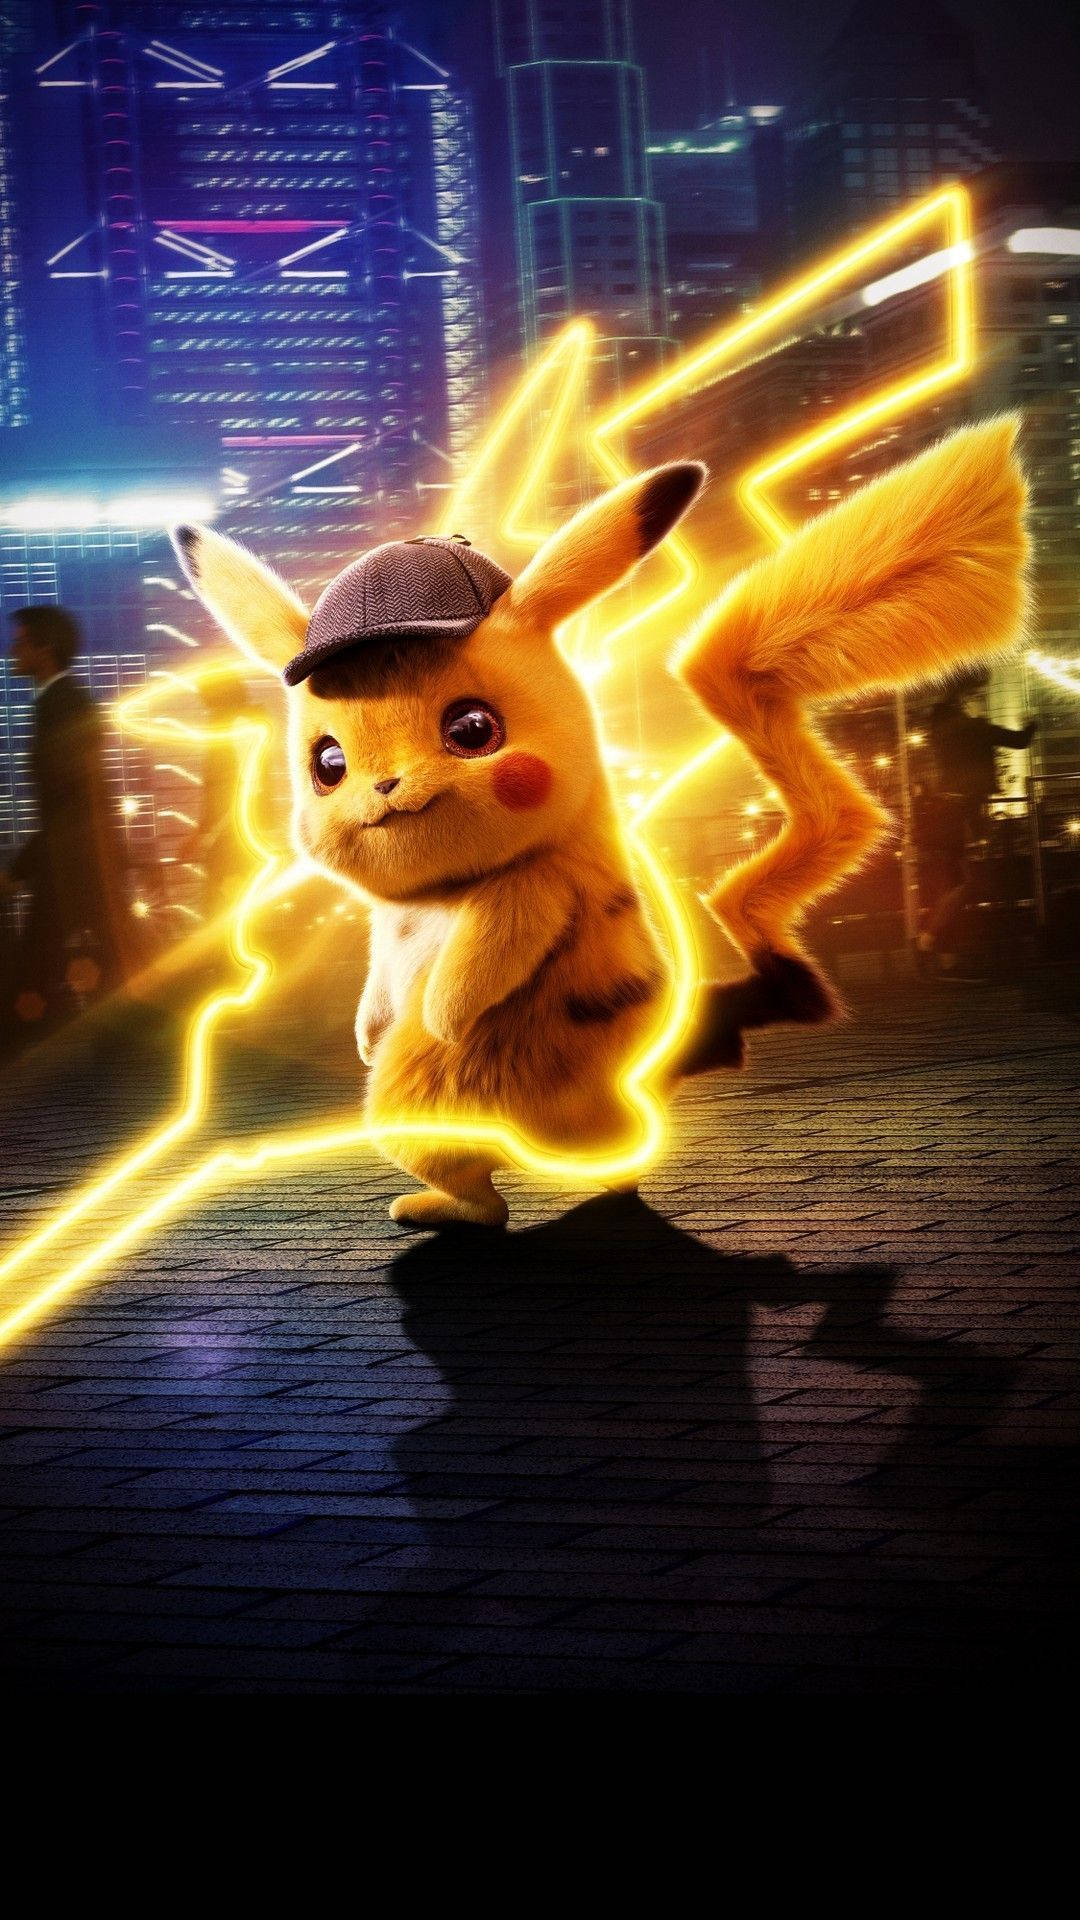 Pikachu wallpaper for iPhone and Android devices. These are the best Detective Pikachu backgrounds for your phone. - Pikachu